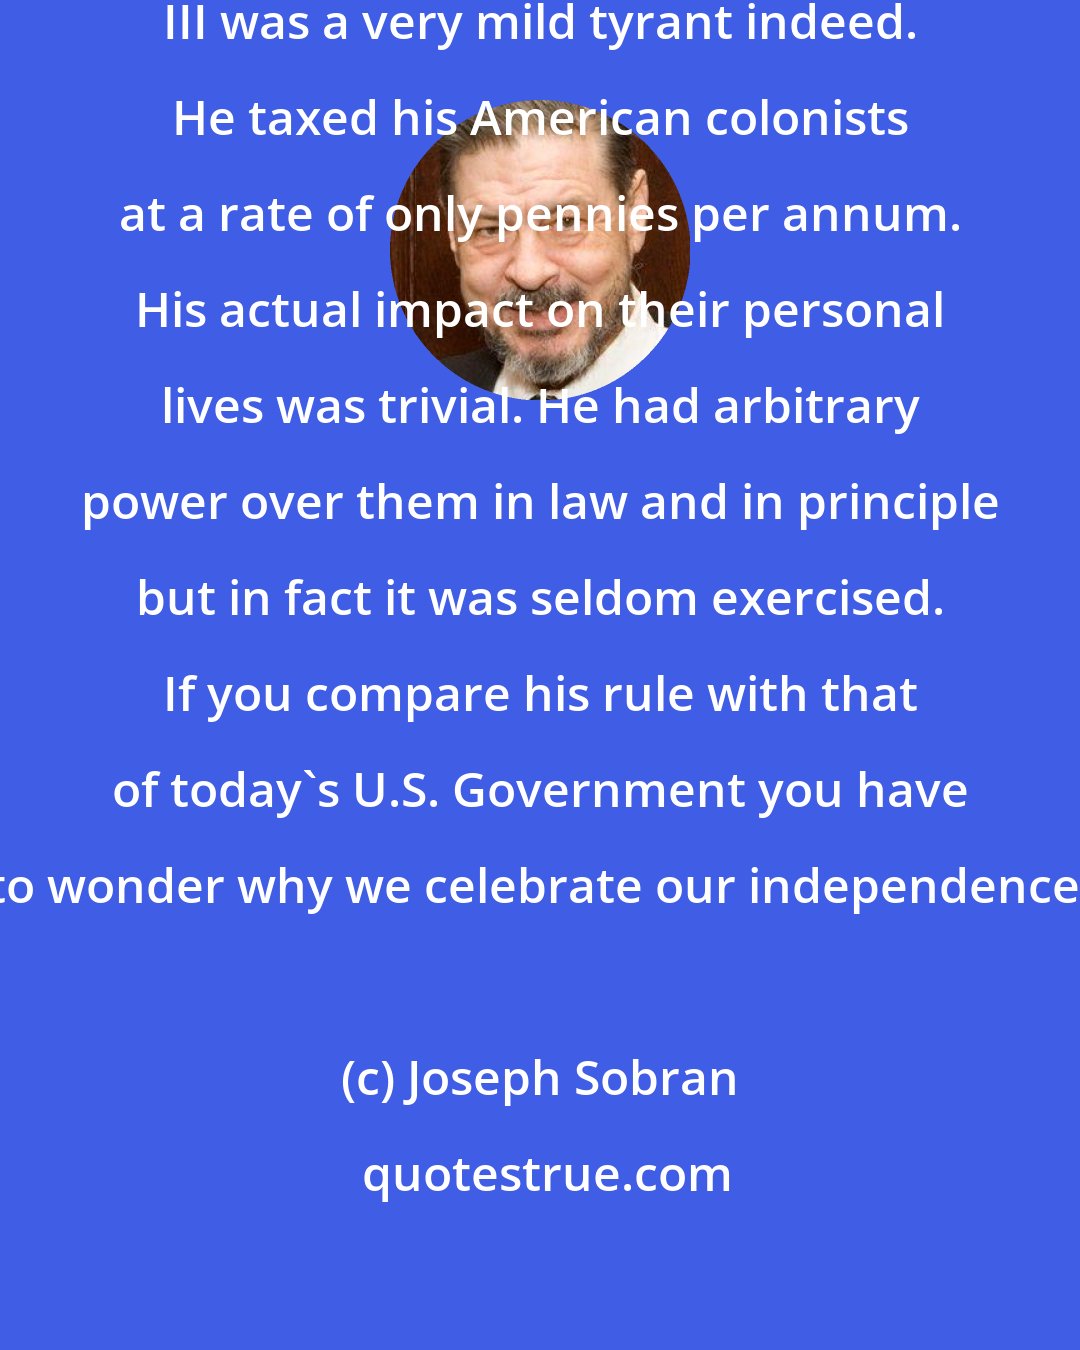 Joseph Sobran: By today's standards King George III was a very mild tyrant indeed. He taxed his American colonists at a rate of only pennies per annum. His actual impact on their personal lives was trivial. He had arbitrary power over them in law and in principle but in fact it was seldom exercised. If you compare his rule with that of today's U.S. Government you have to wonder why we celebrate our independence.